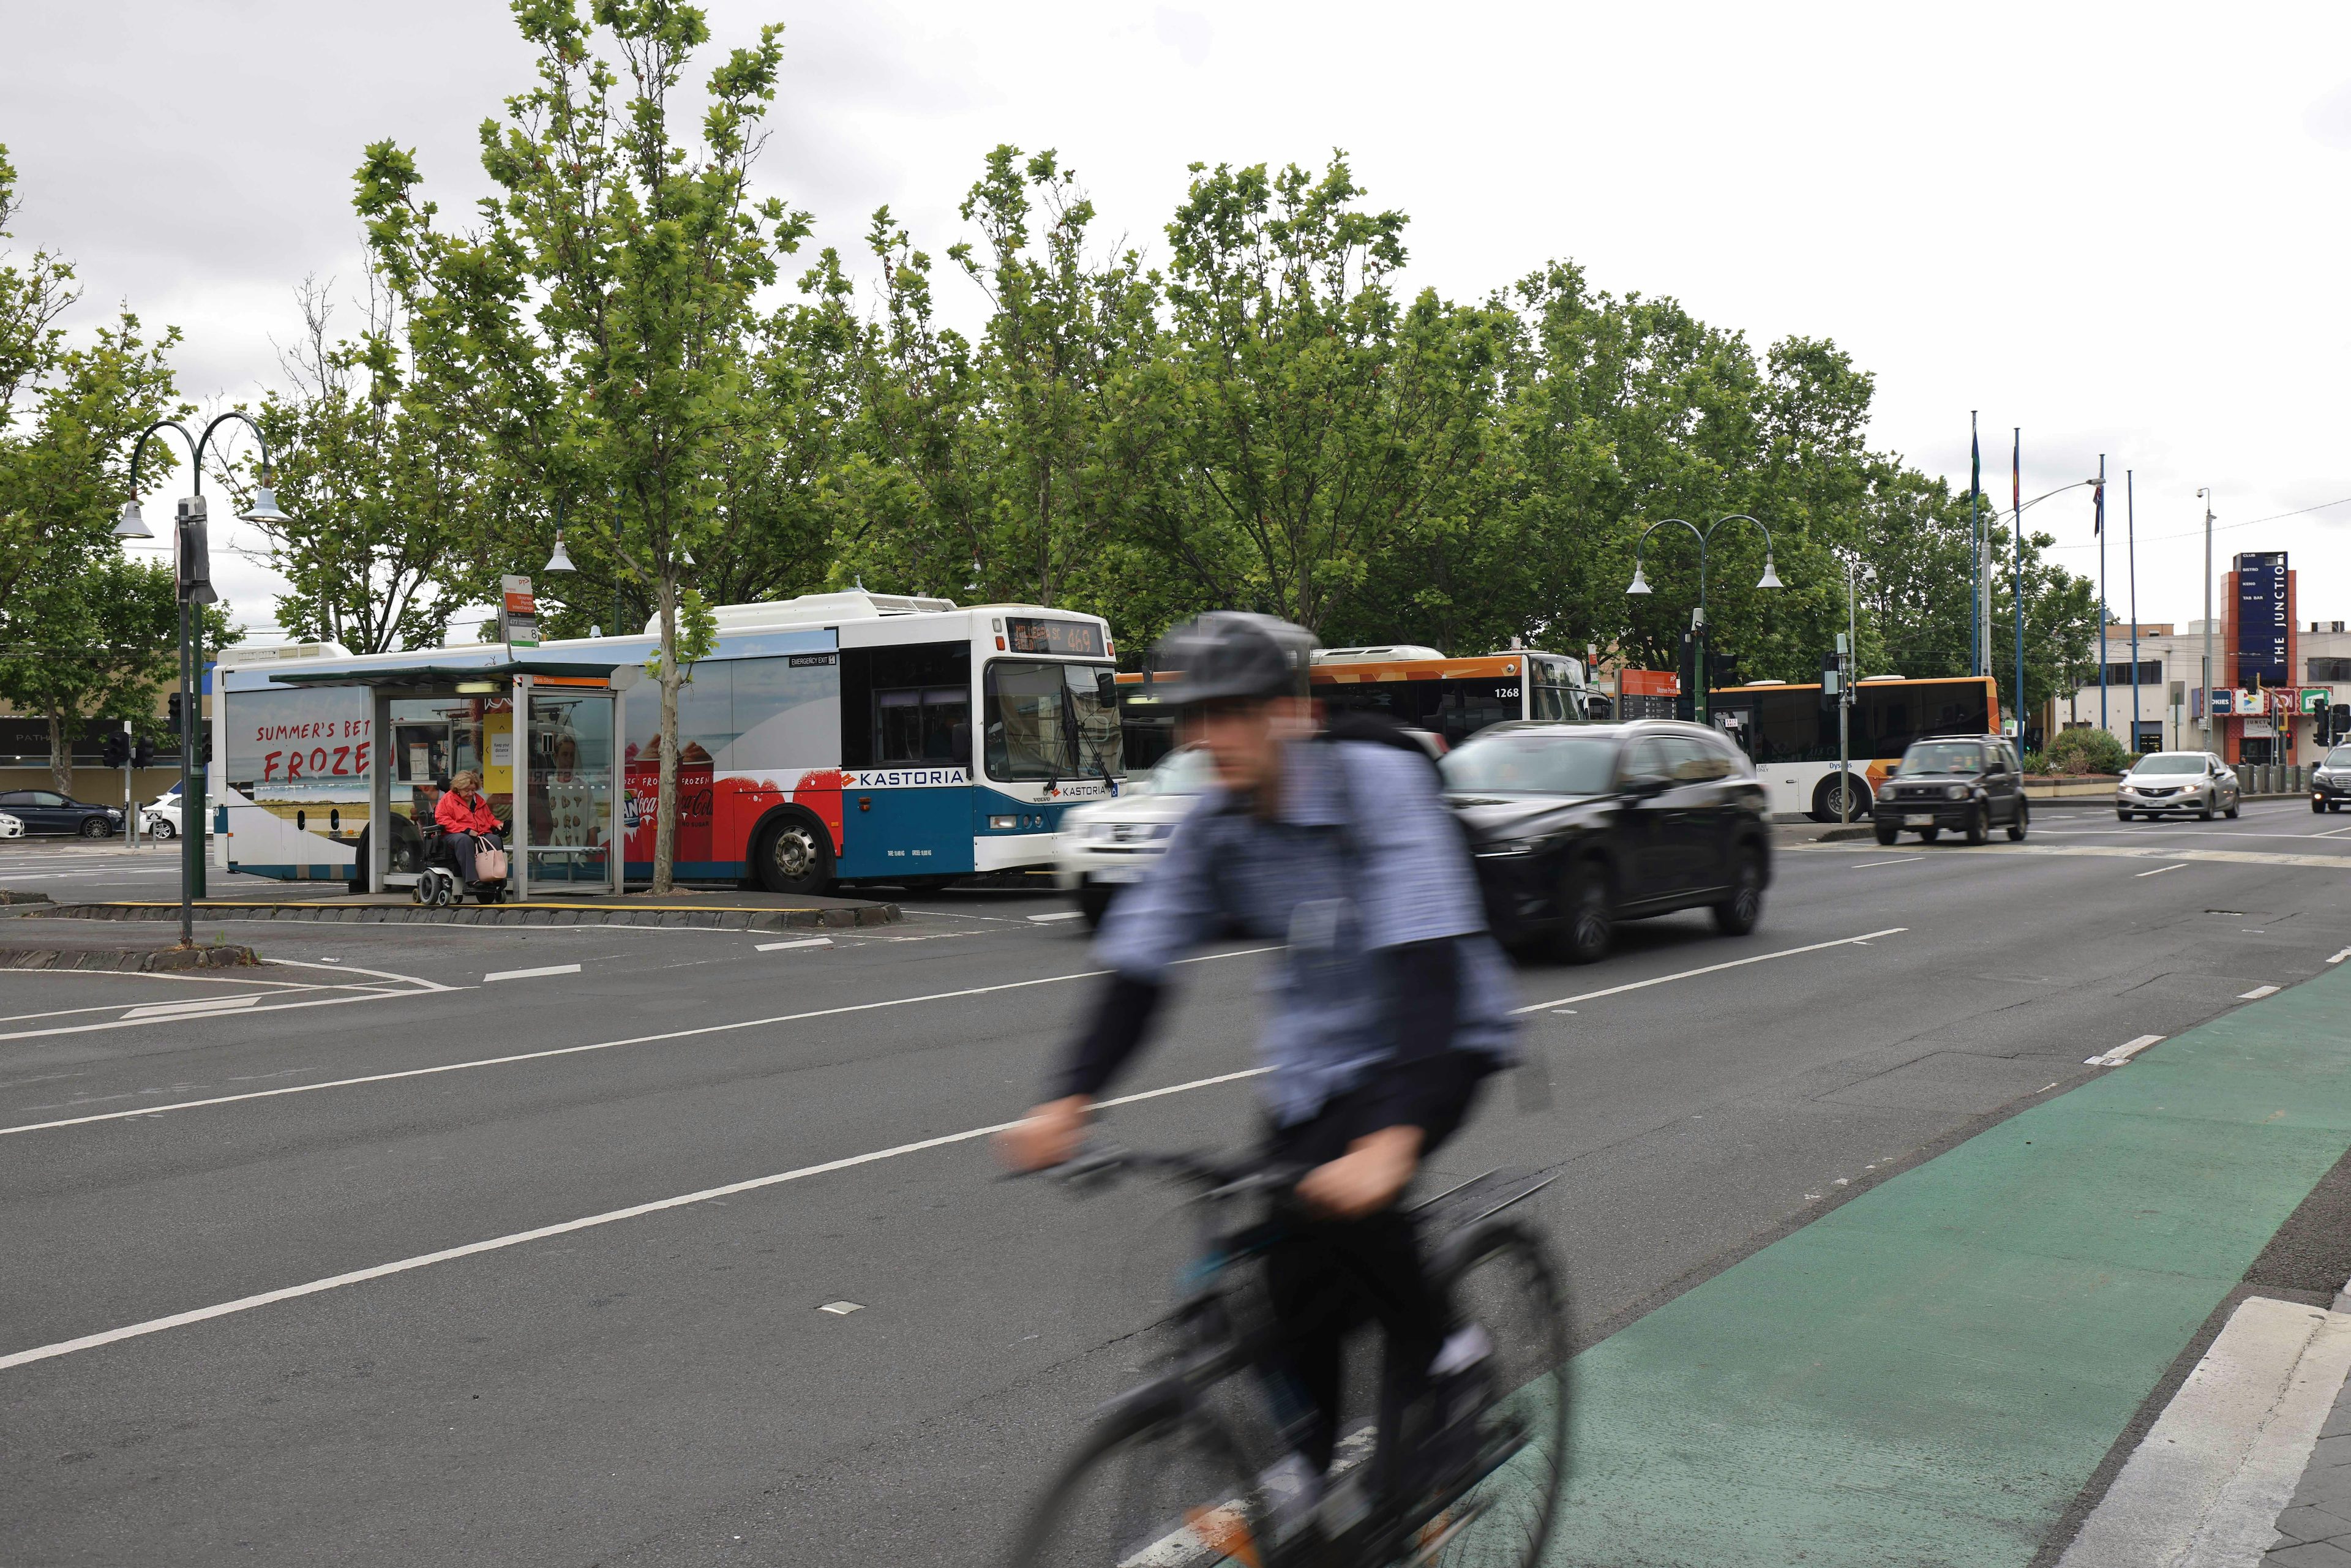 Street with cyclist on bike lane in foreground, cars and buses